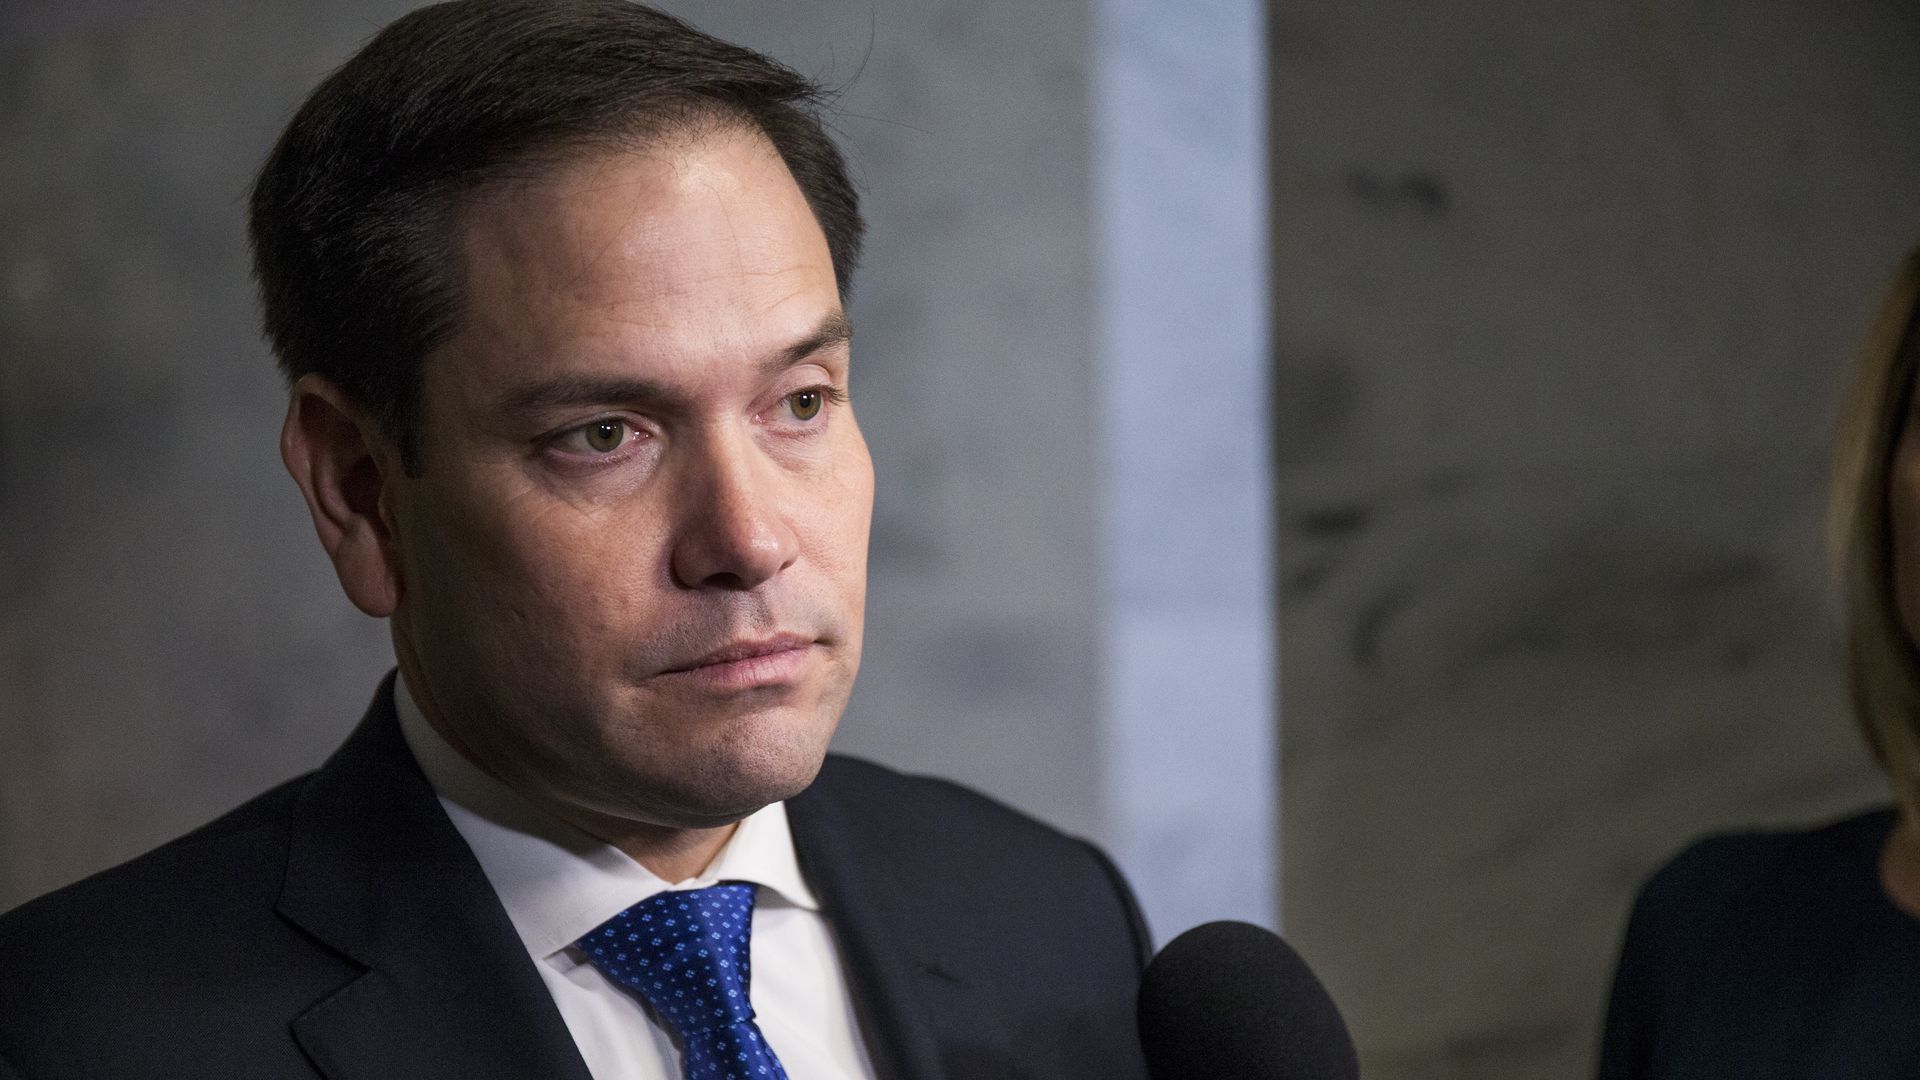 In this image, Marco Rubio looks ahead while facing a microphone.